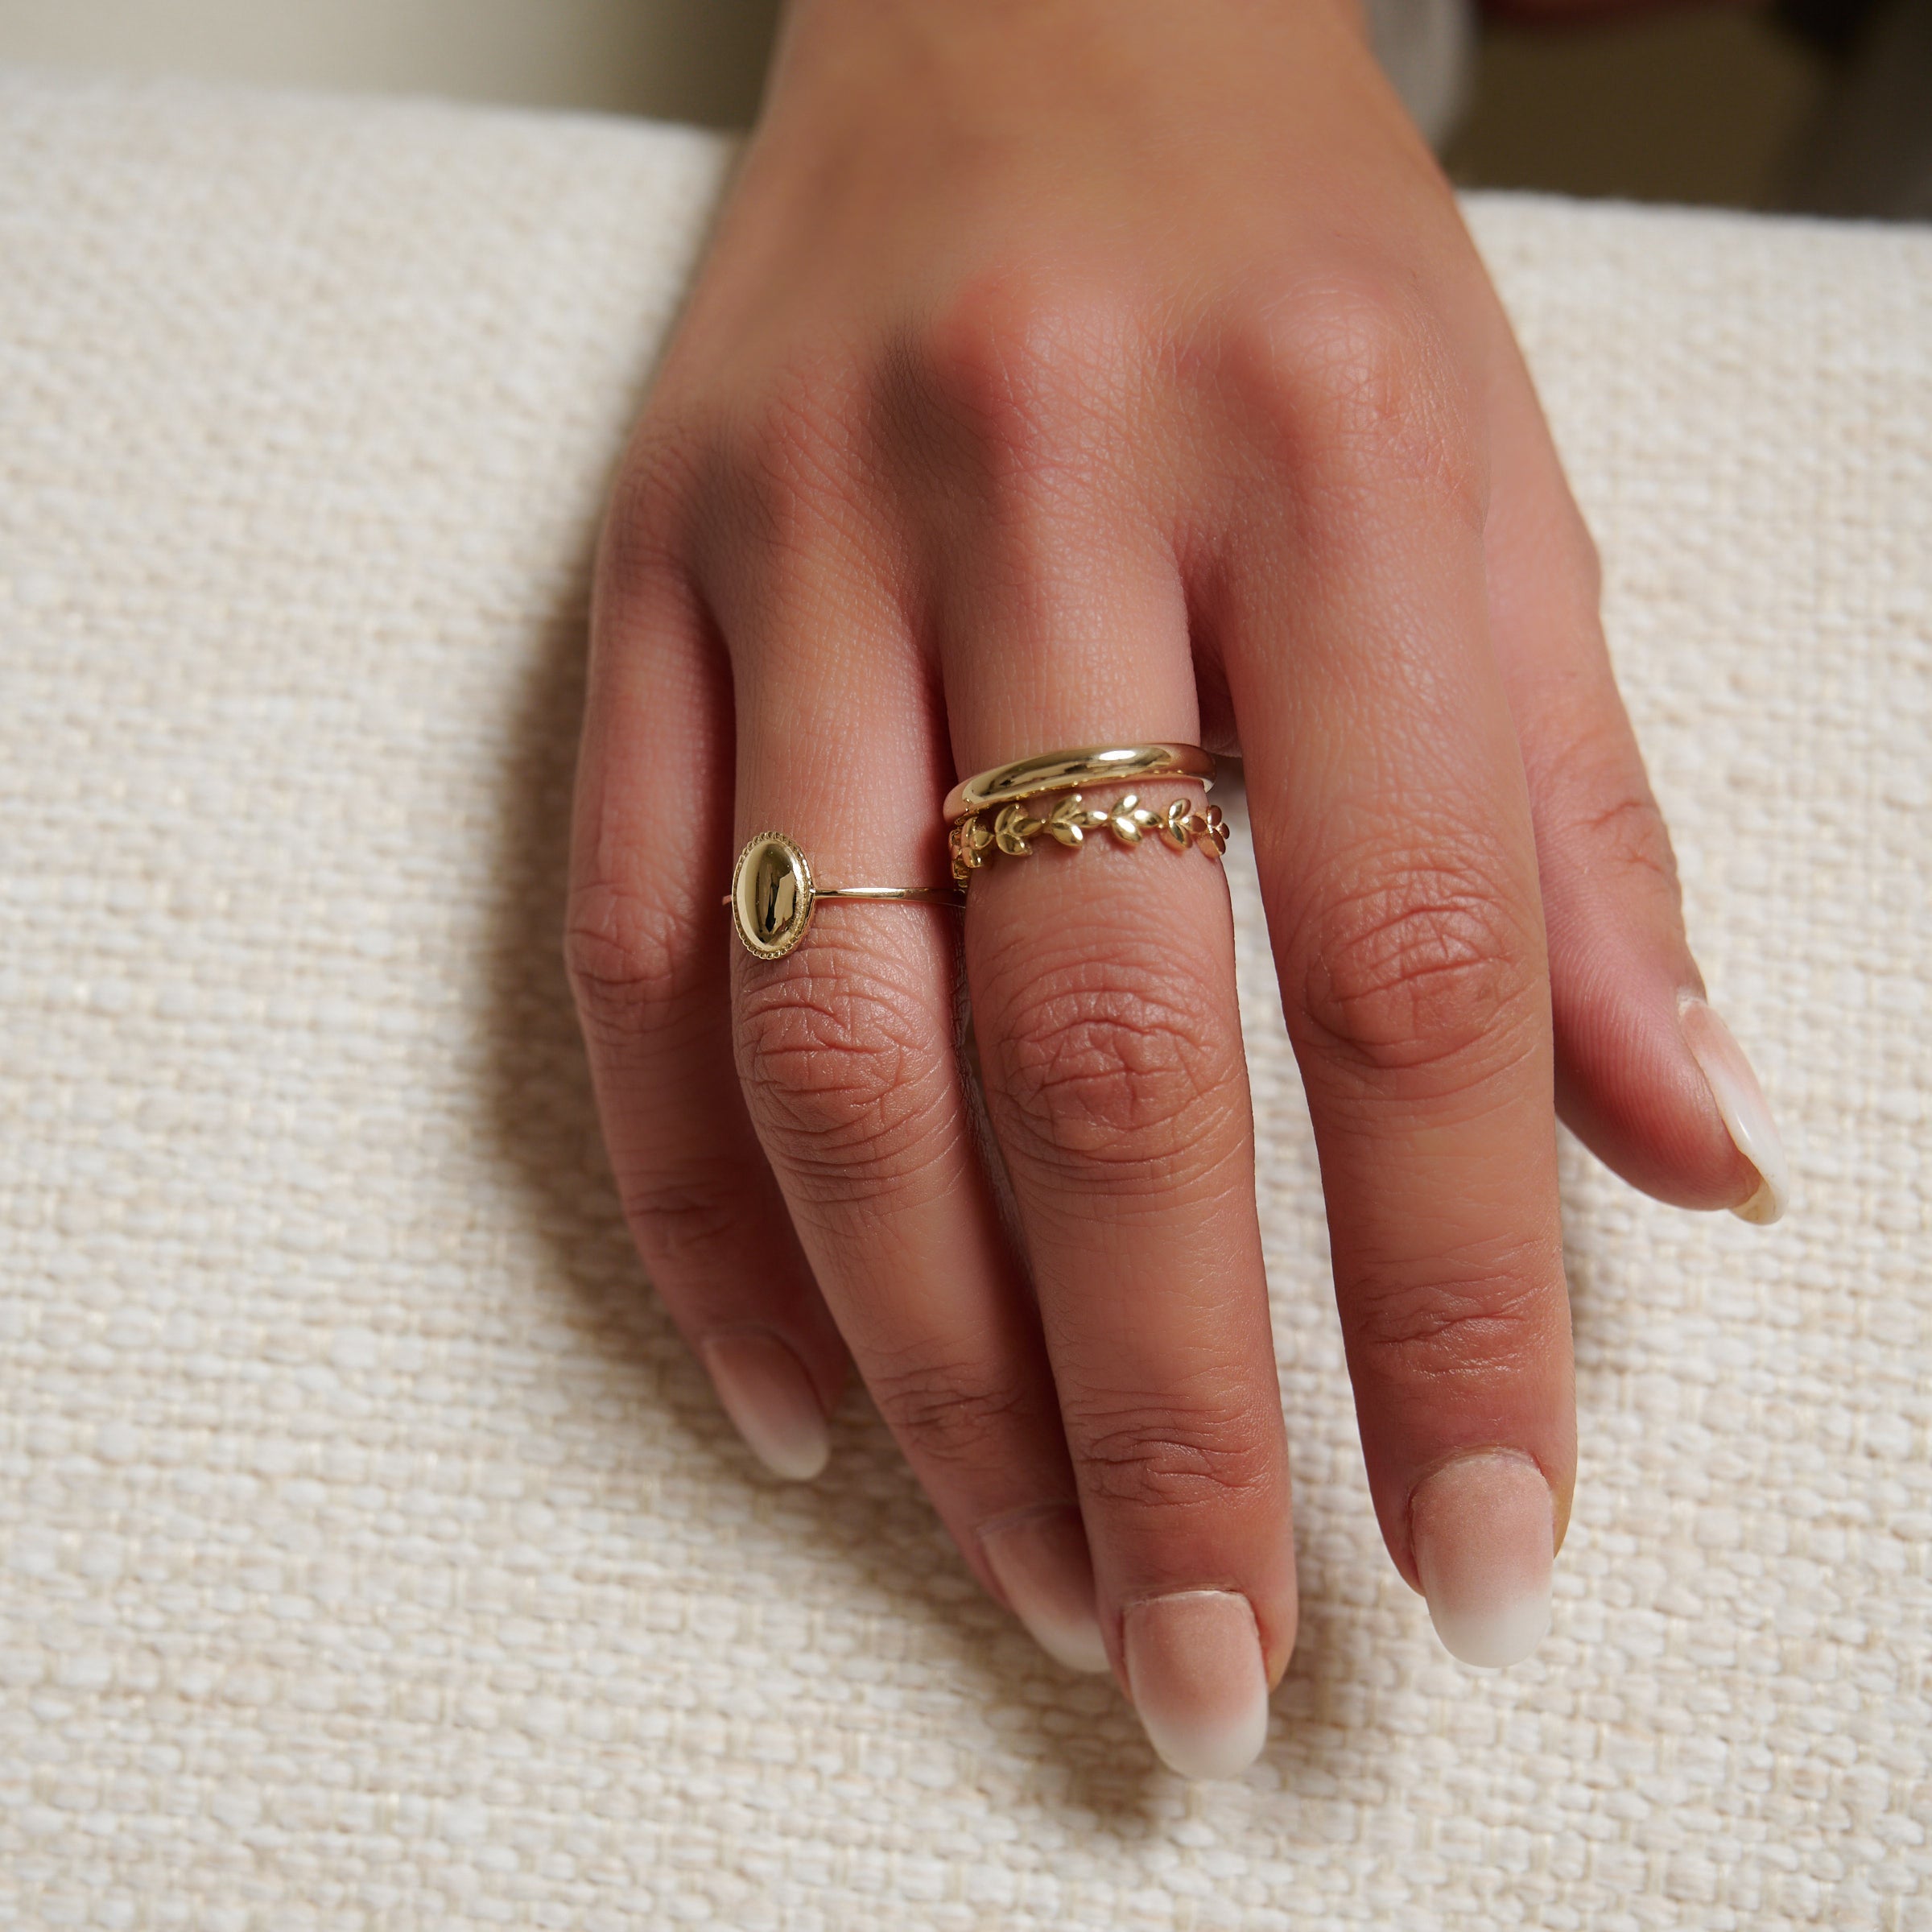 Arlette 9ct Yellow Gold Fine Ring